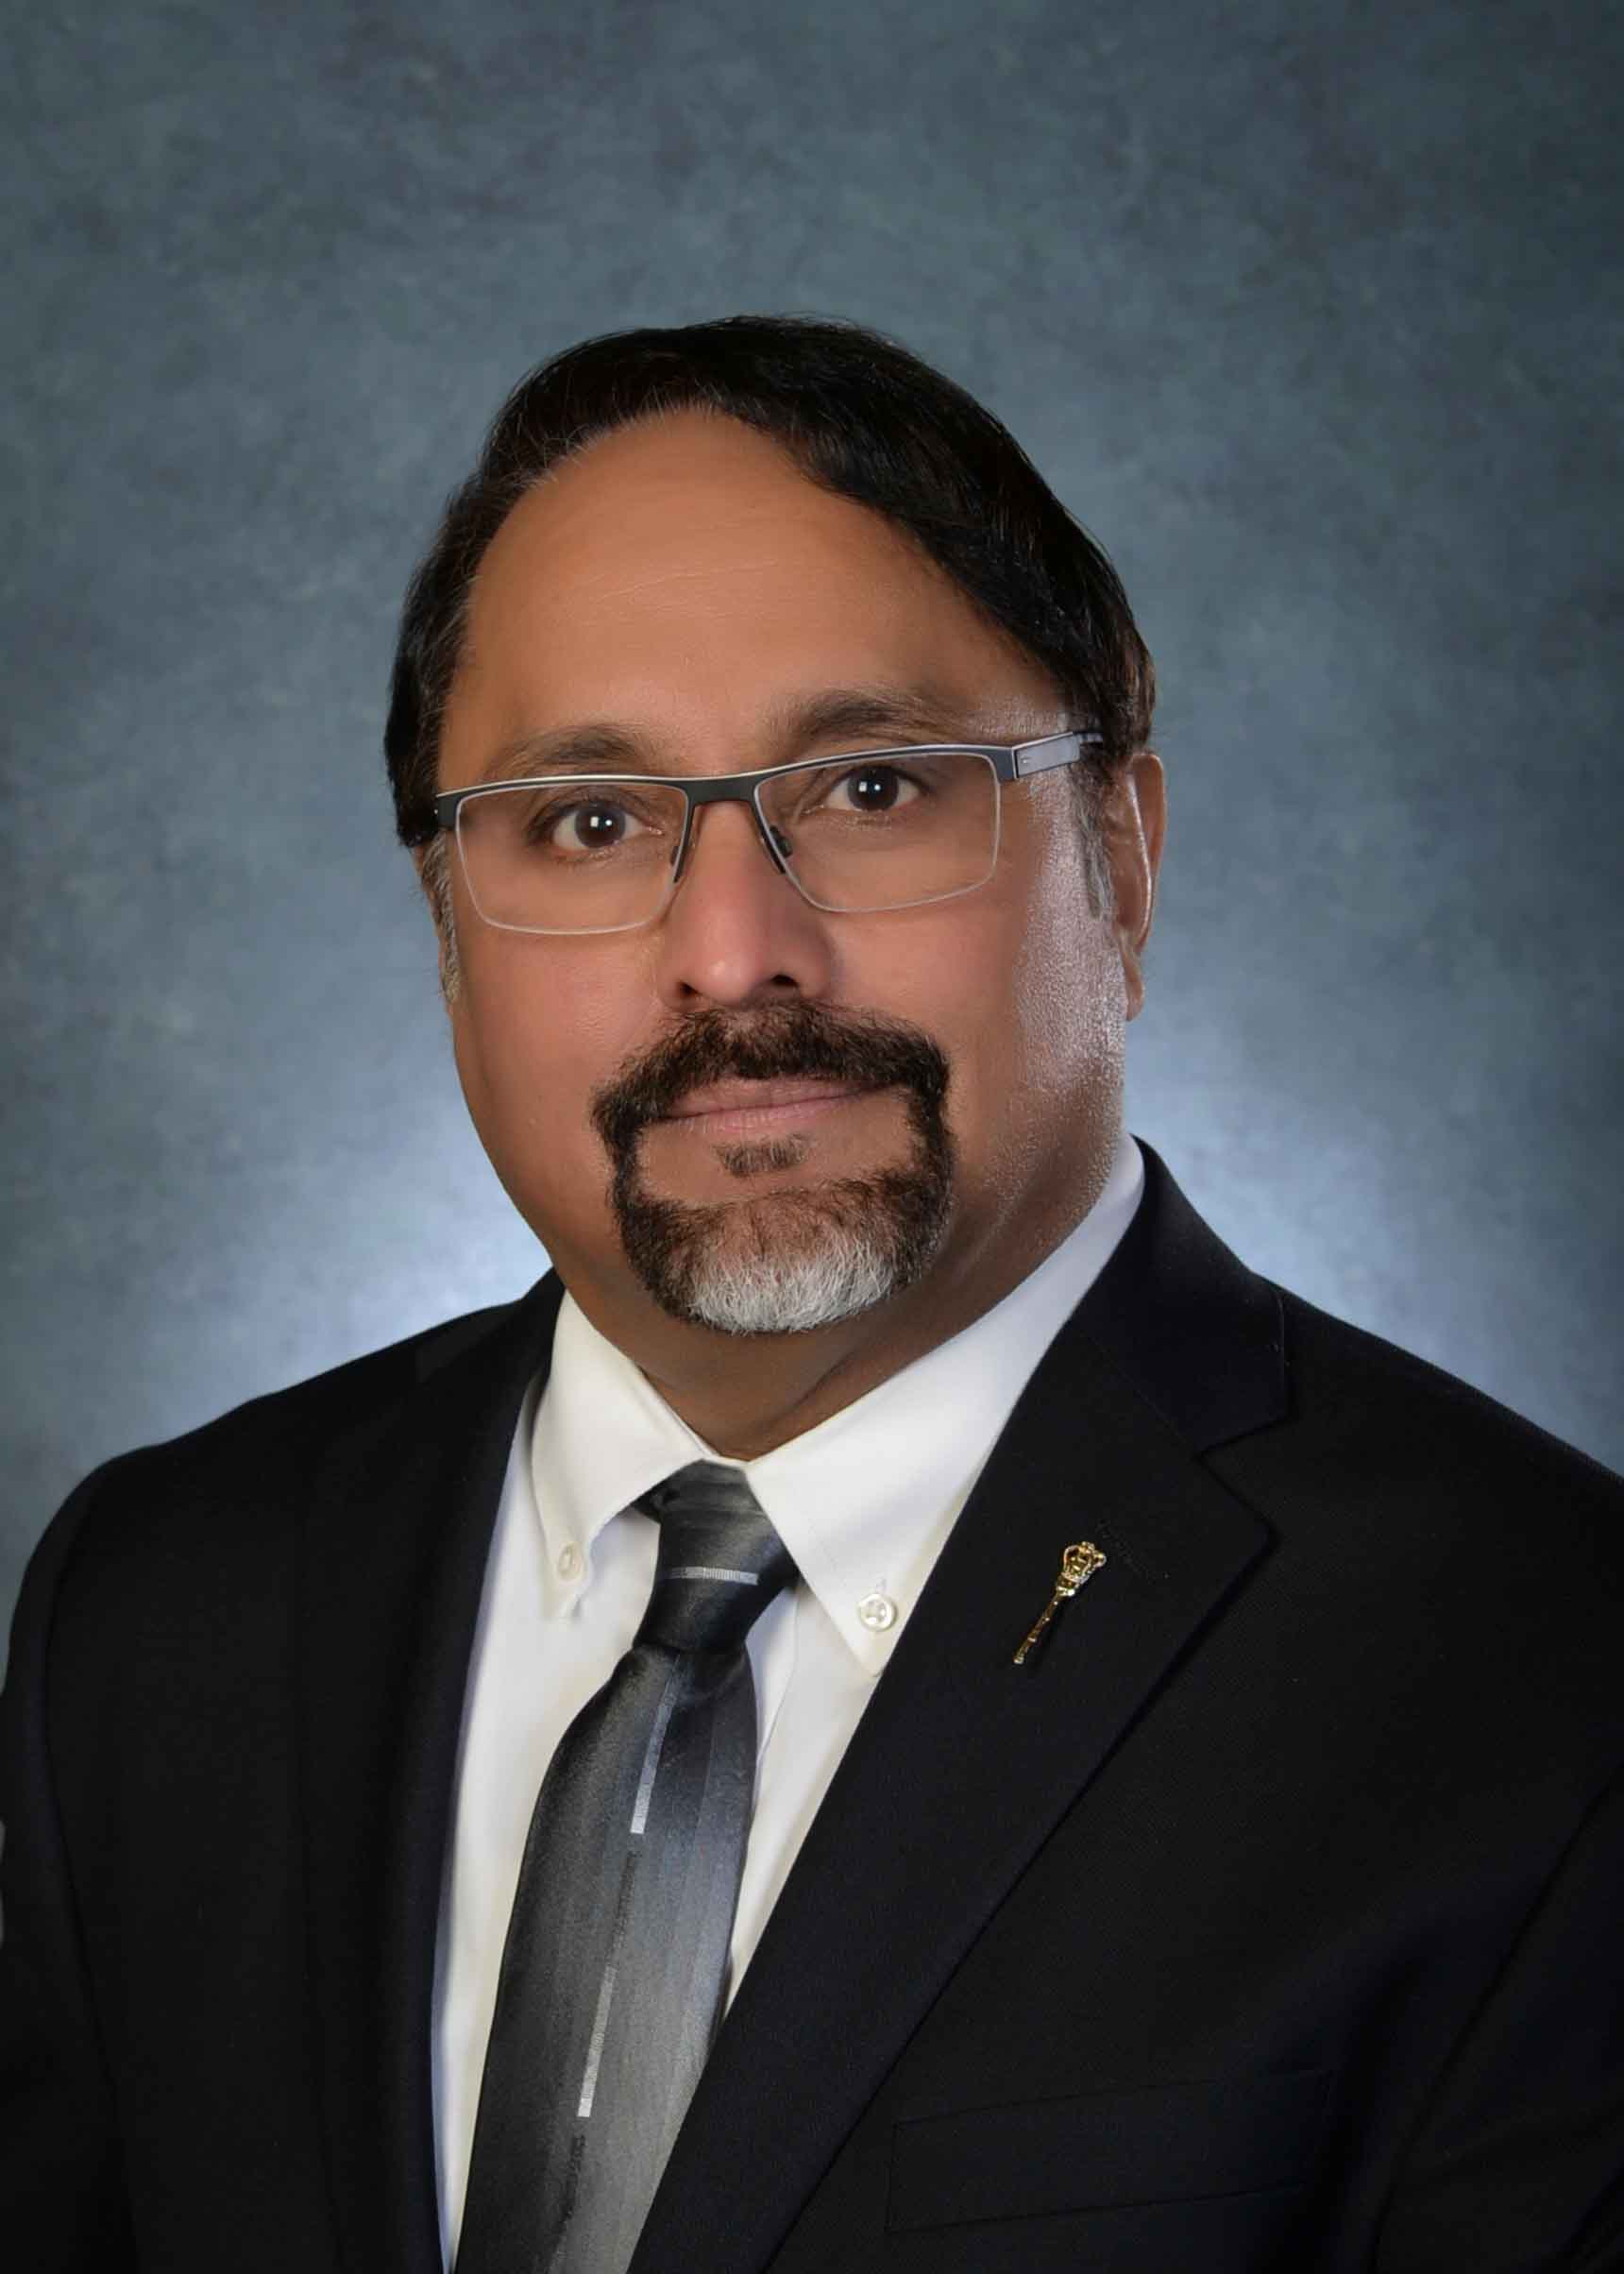 A picture of Mr. Gary Grewal, MLA for Regina Northeast